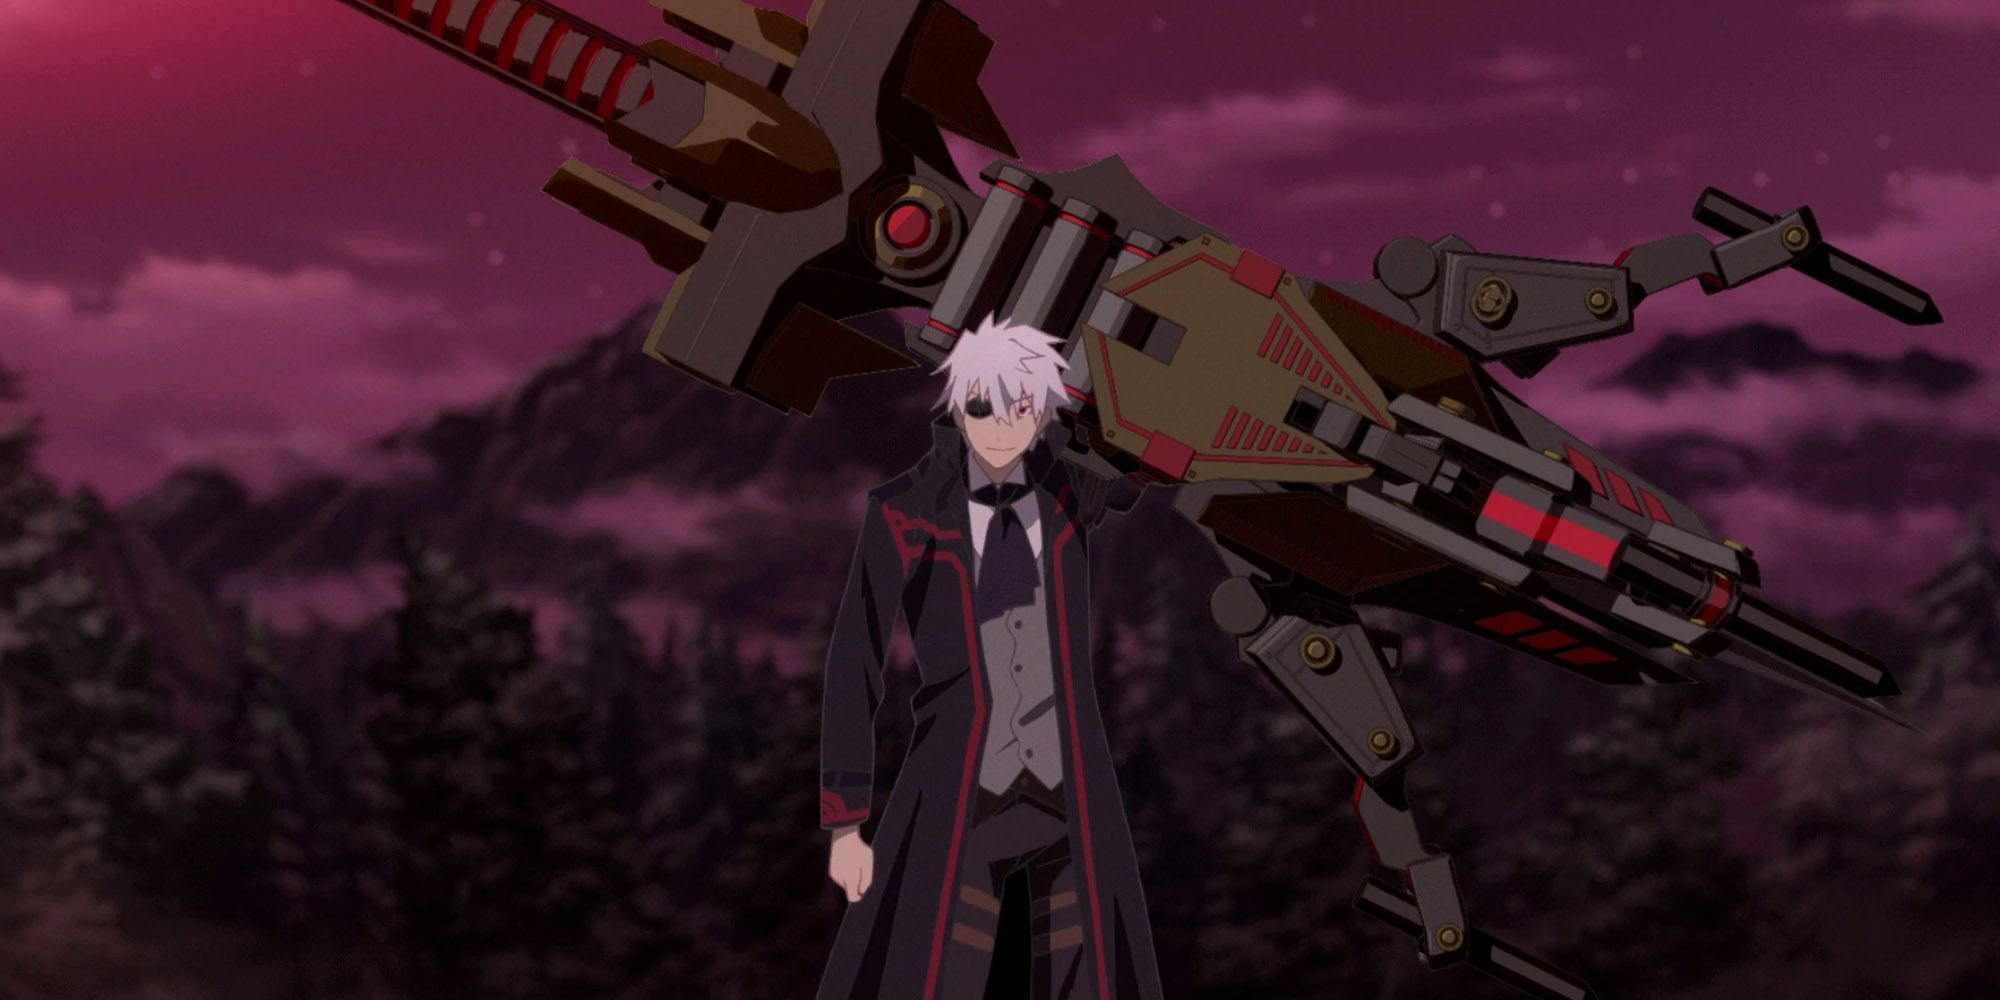 From Commonplace To Worlds Strongest - Hajime Holding Gigantic Gun He Made With His Synergist Class